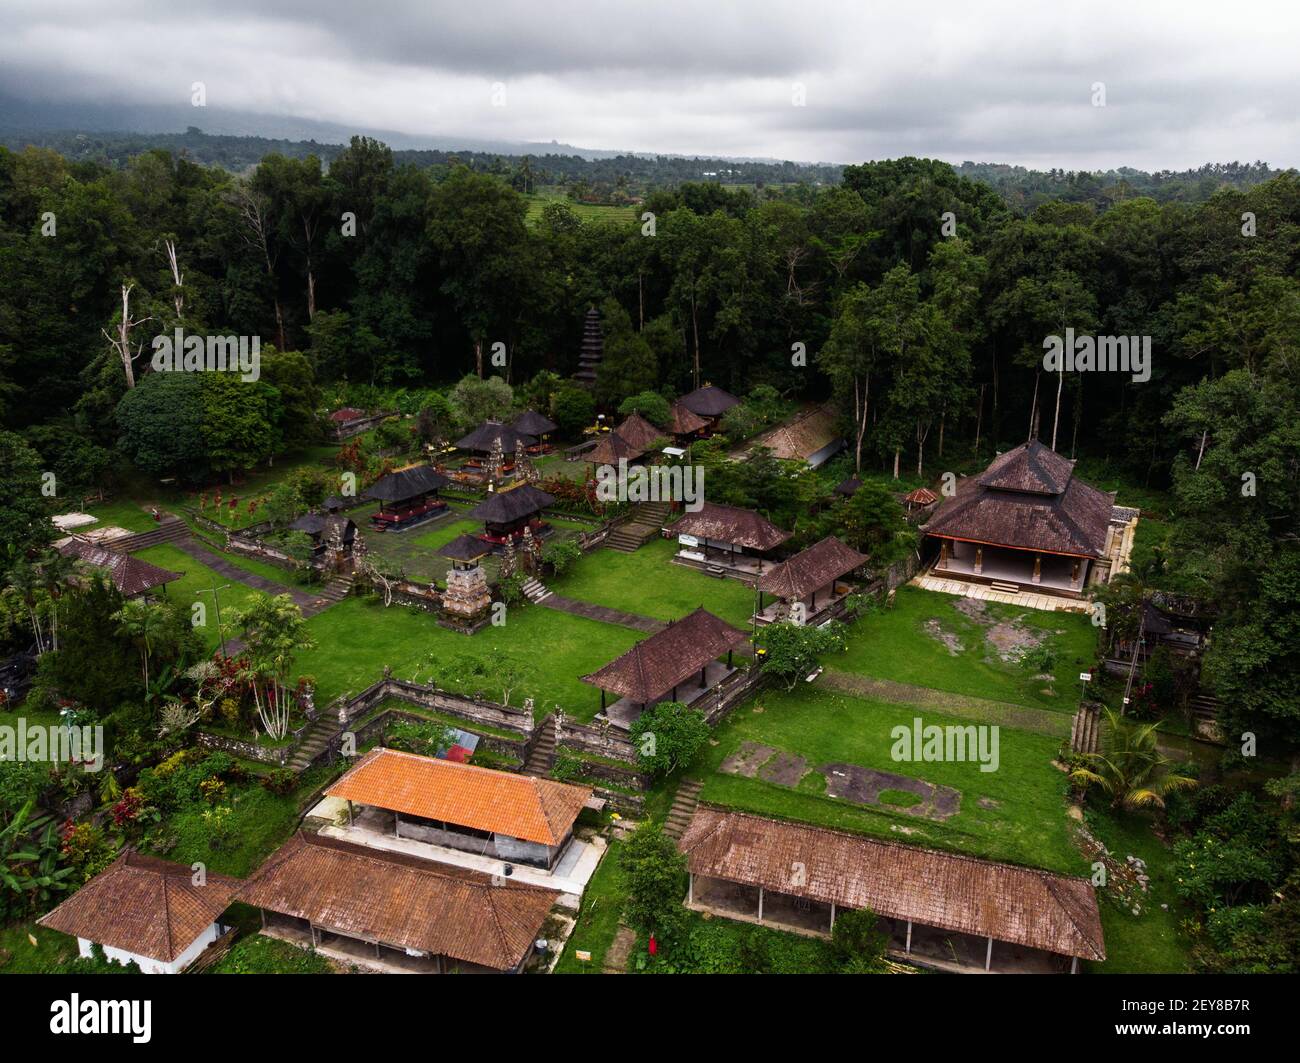 Aerial panorama view of remote hindu temple Pura Luhur Besikalung balinese  culture in Penebel Tabanan Bali Indonesia South East Asia Stock Photo -  Alamy